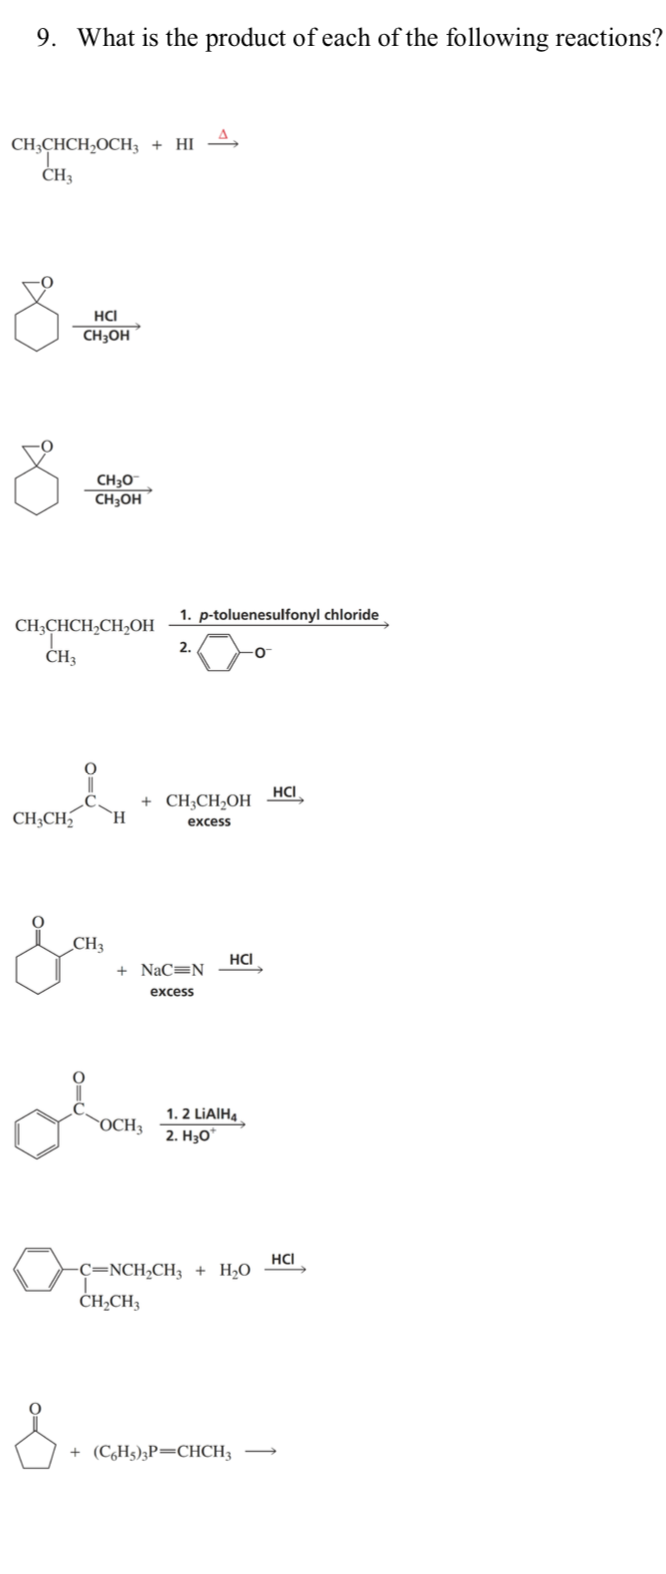 9. What is the product of each of the following reactions?
CH;CHCH,OCH3 + HI A,
CH3
HCI
CH;OH
CH3O
CH;OH
